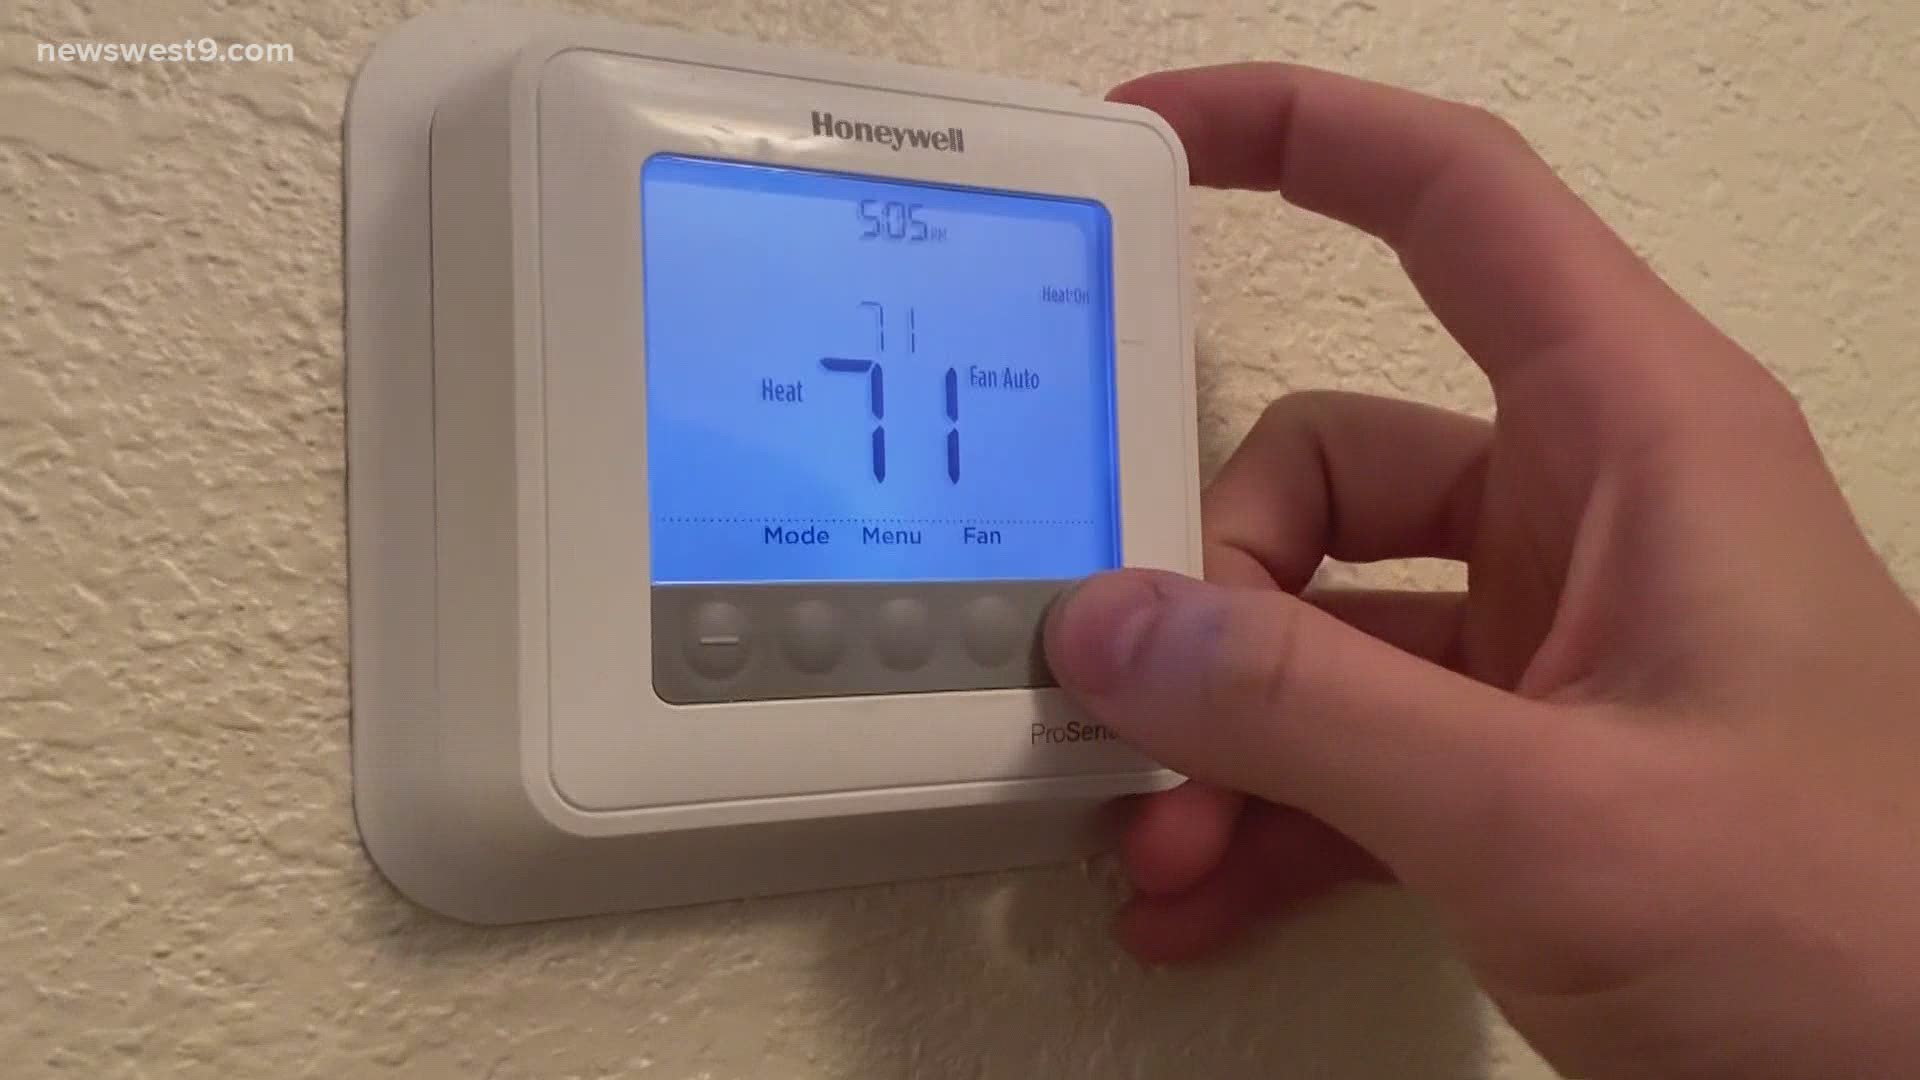 An HVAC professional gives tips in the middle of unprecedented winter weather for Texas.